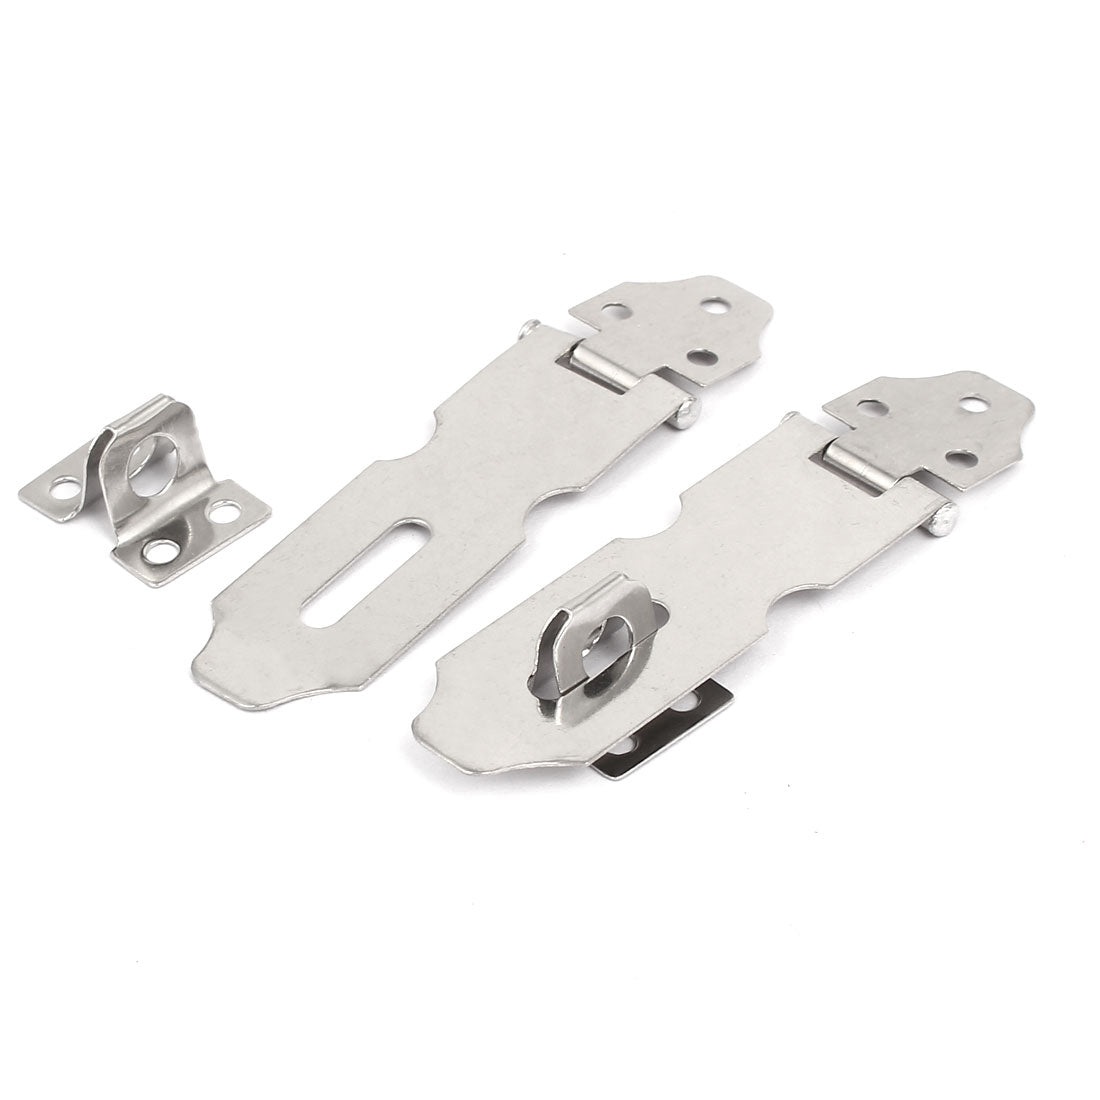 uxcell Uxcell Cupboard Drawer Safety Padlock Door Latch Lock Hasp Staples Silver Tone 5pcs